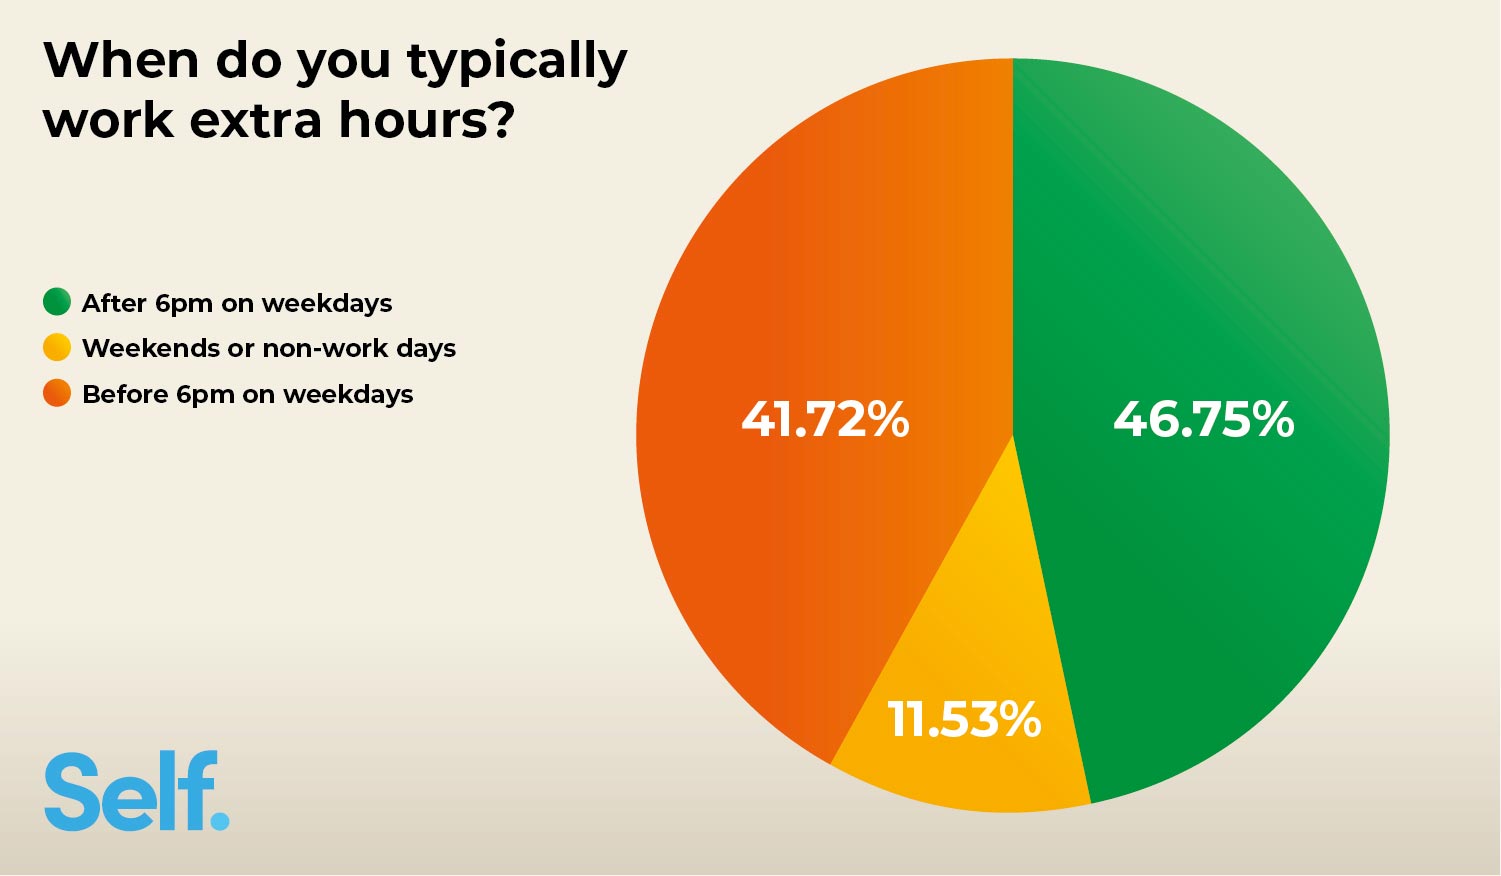 When do you typically work extra hours